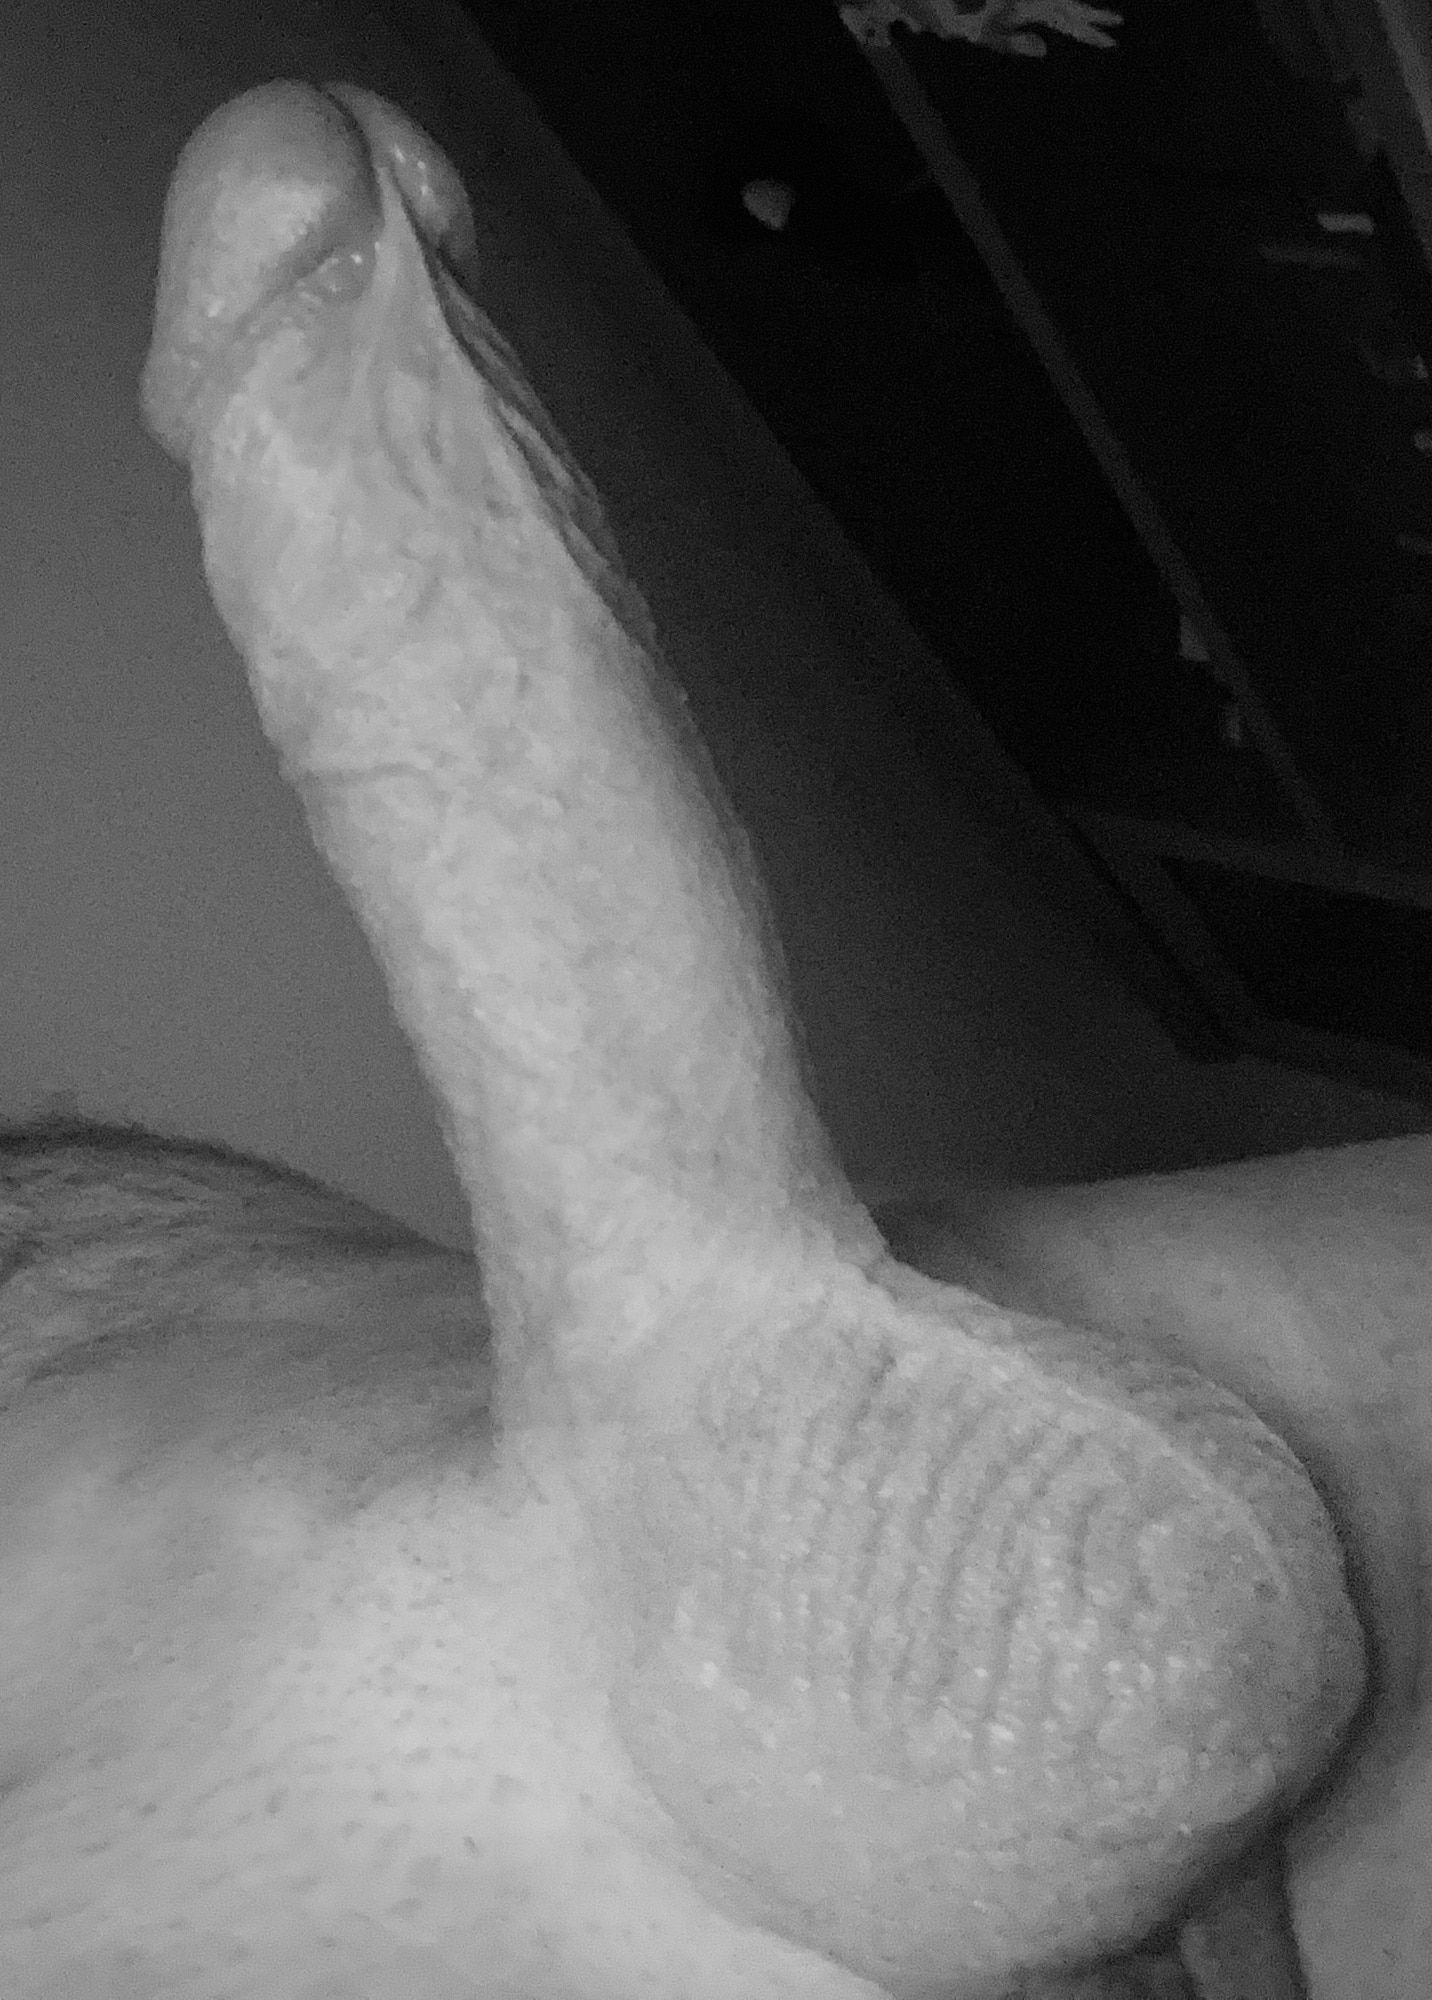 pics of my dick ♥️ have fun watching it